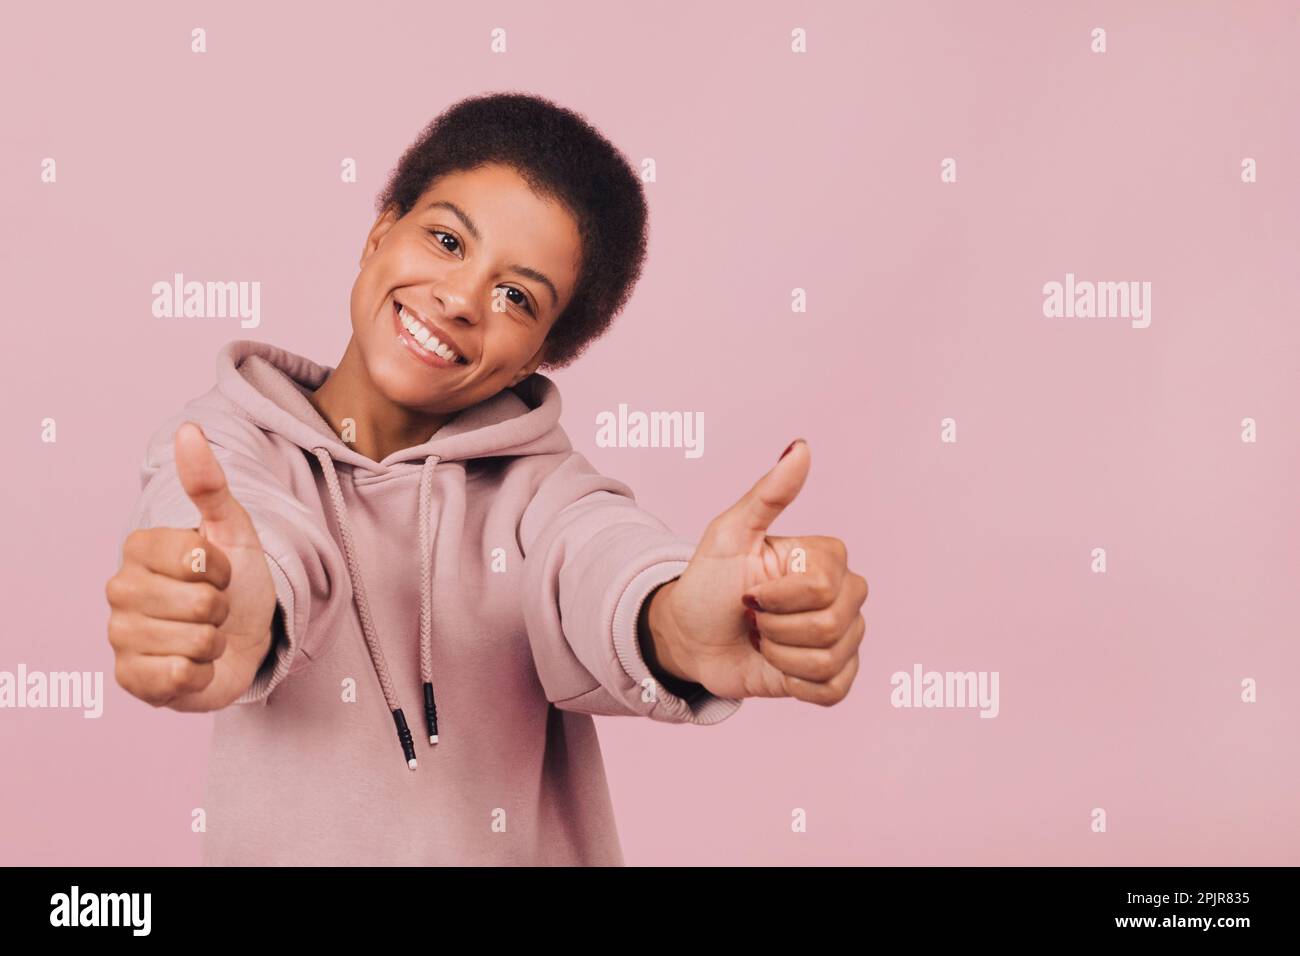 Close up portrait of happy young black woman showing thumbs up. Cheerful girl in casual clothes posing over pink background Stock Photo